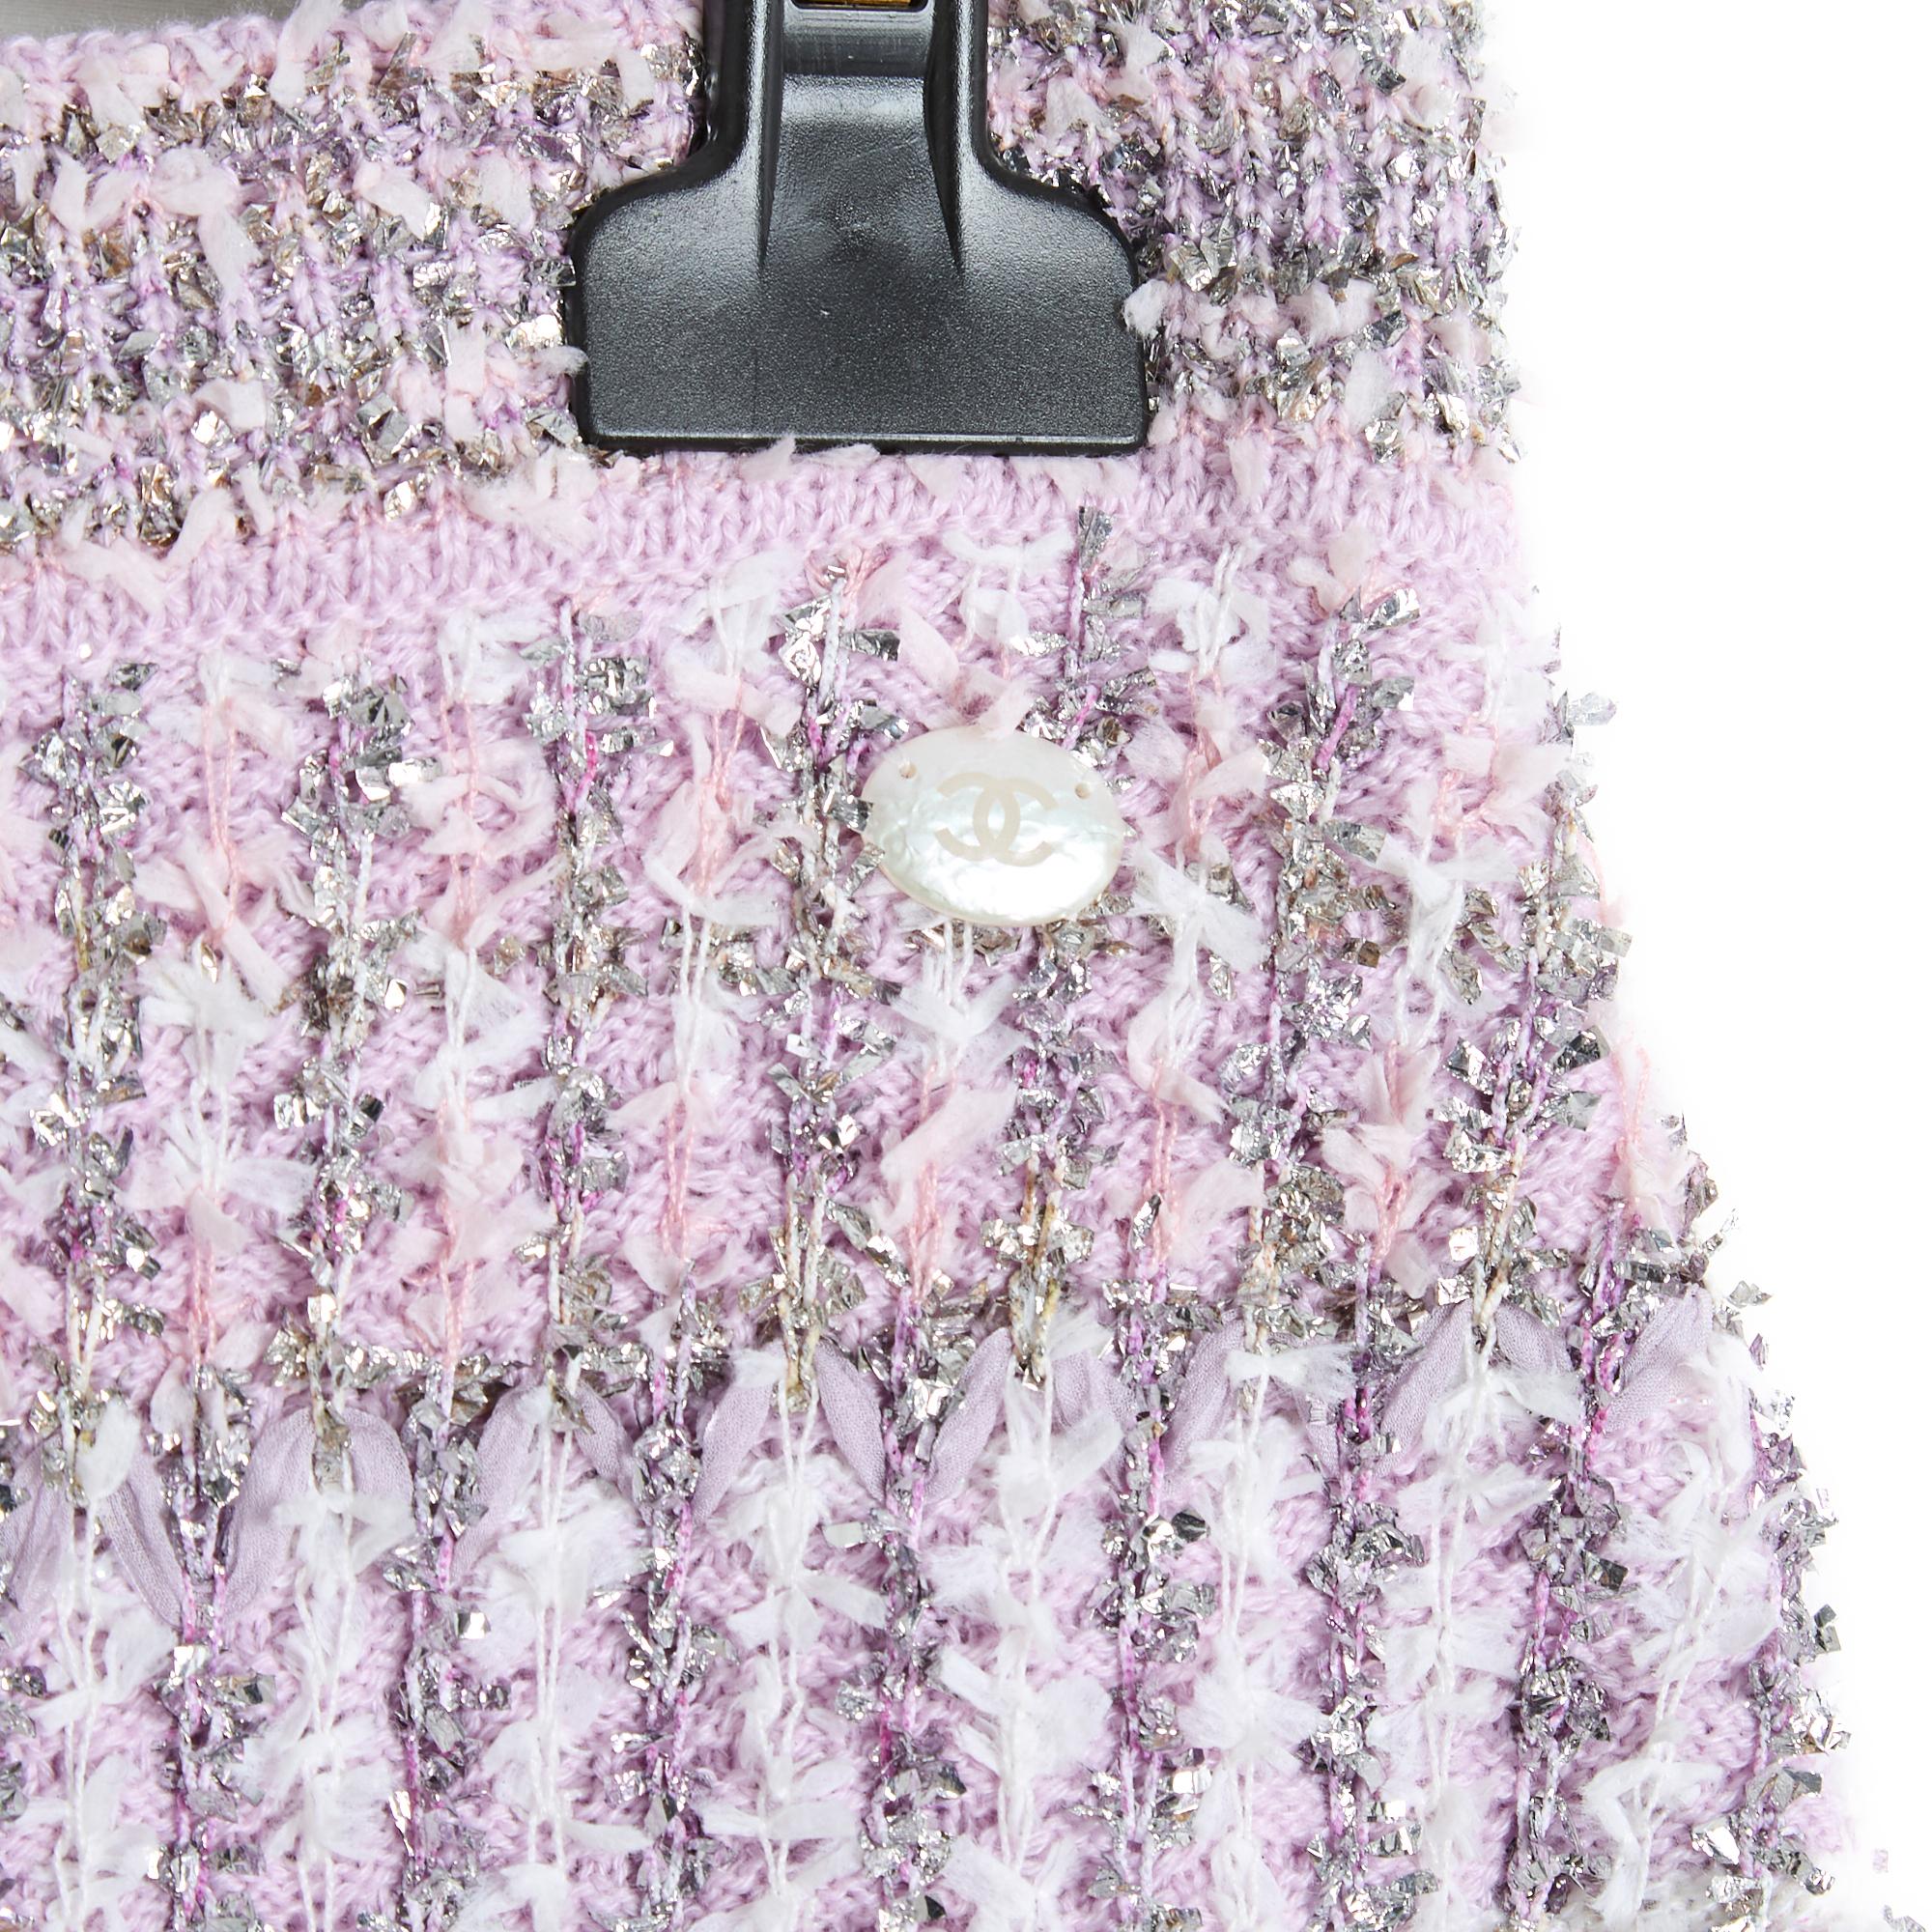 Chanel skirt from Cruise 2018 collection by Karl Lagerfeld in light purple cashmere tweed mixed with silver and white threads, elastic waist closed with a zip and a hook, unlined. Size 40FR: waist (without stretching the elastic belt) 37 cm, length